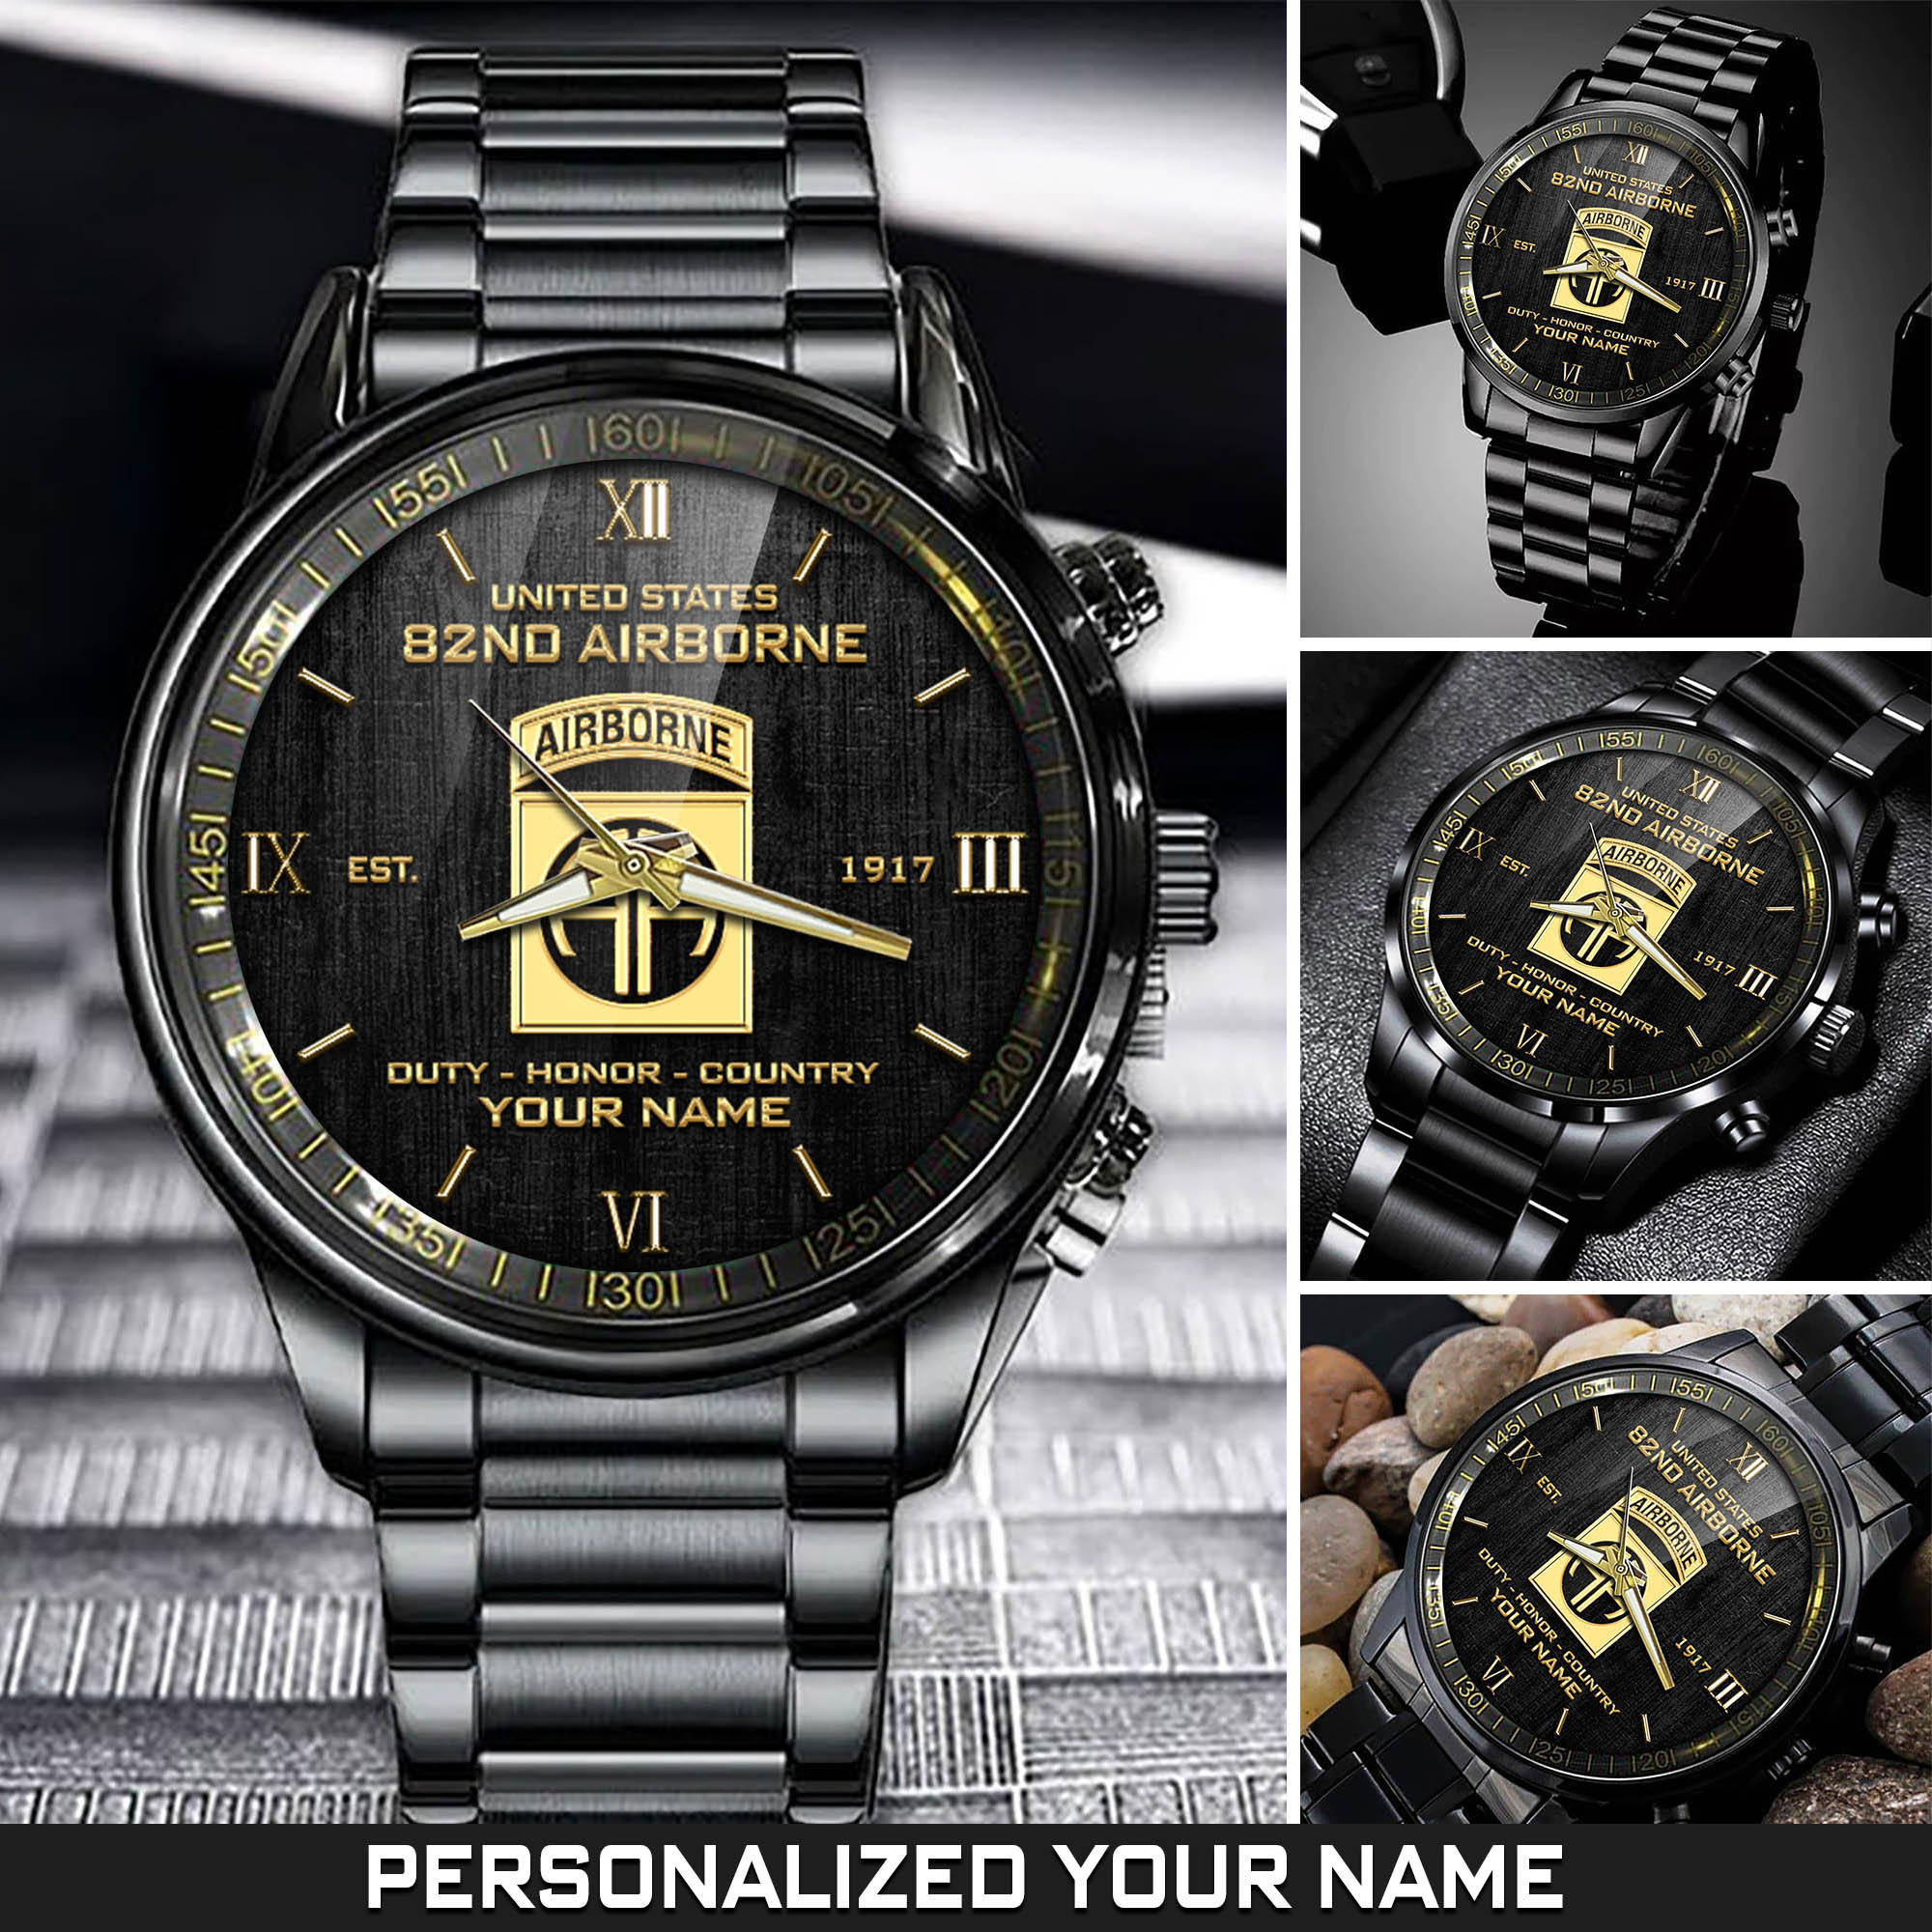 Personalized 82nd Airborne Military Black Fashion Watch With Your Name, Military Watch , US Military Gifts ETHY-57645